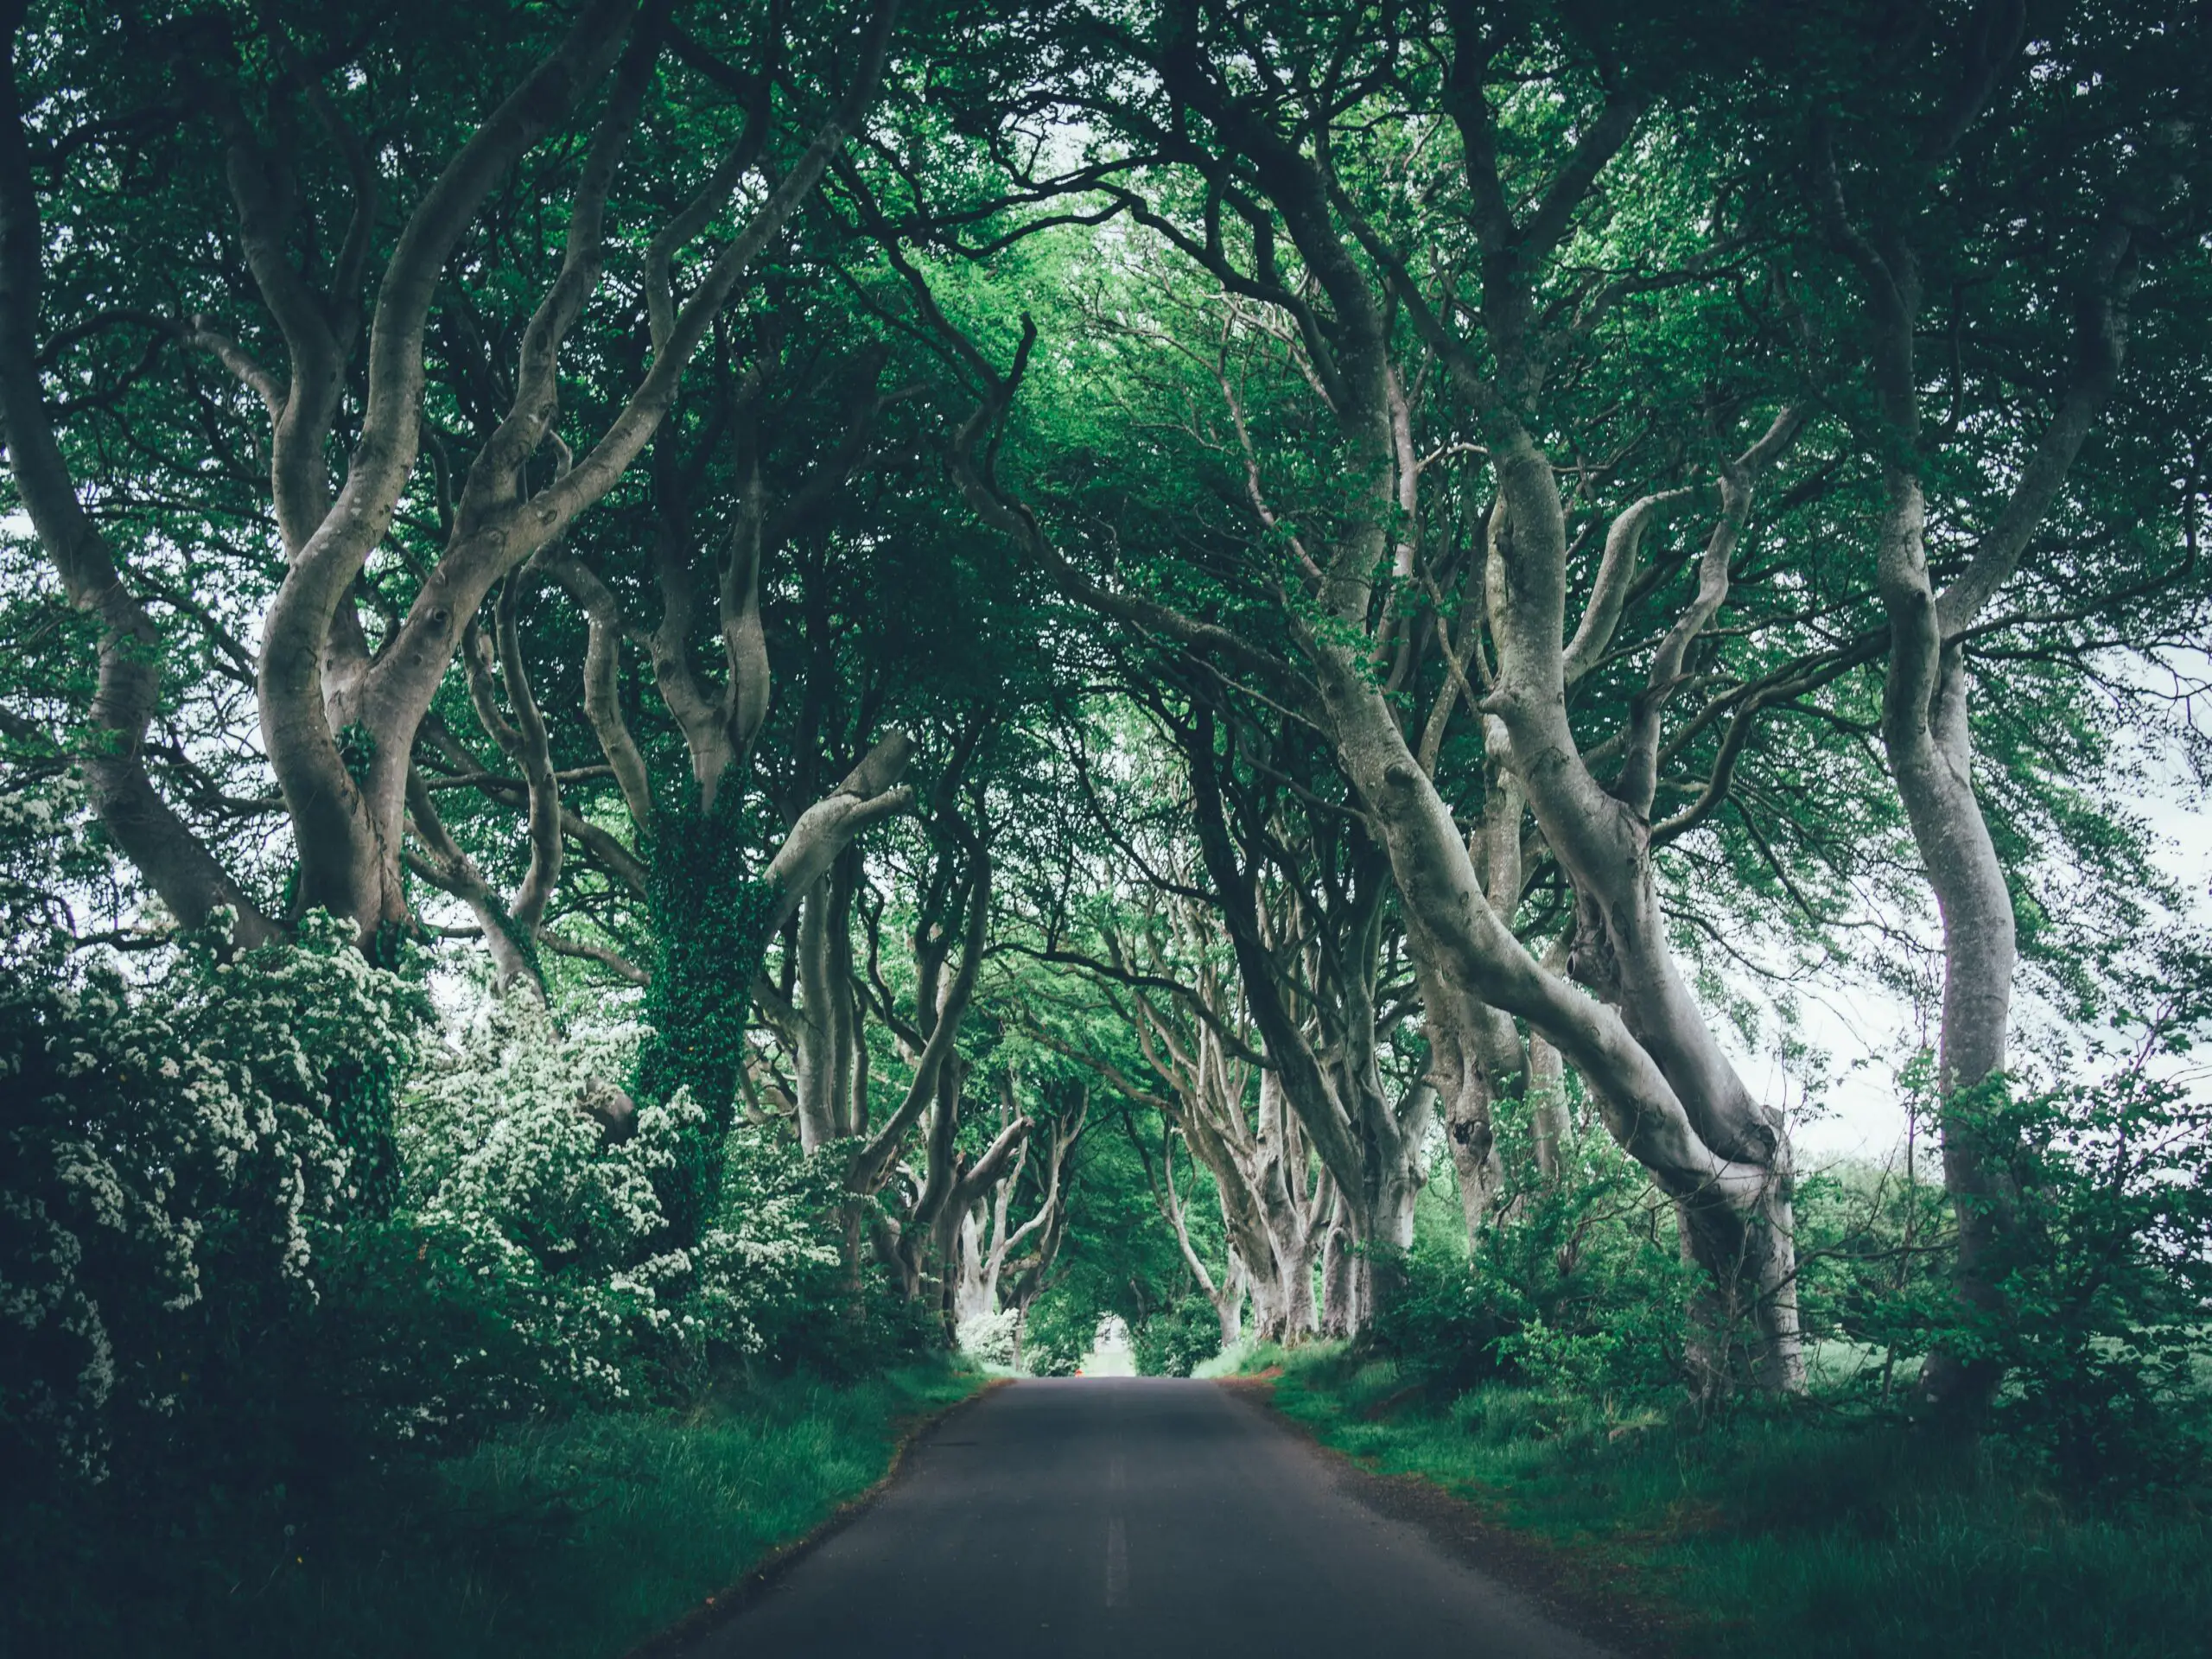 Where was Game of Thrones Filmed in Ireland?